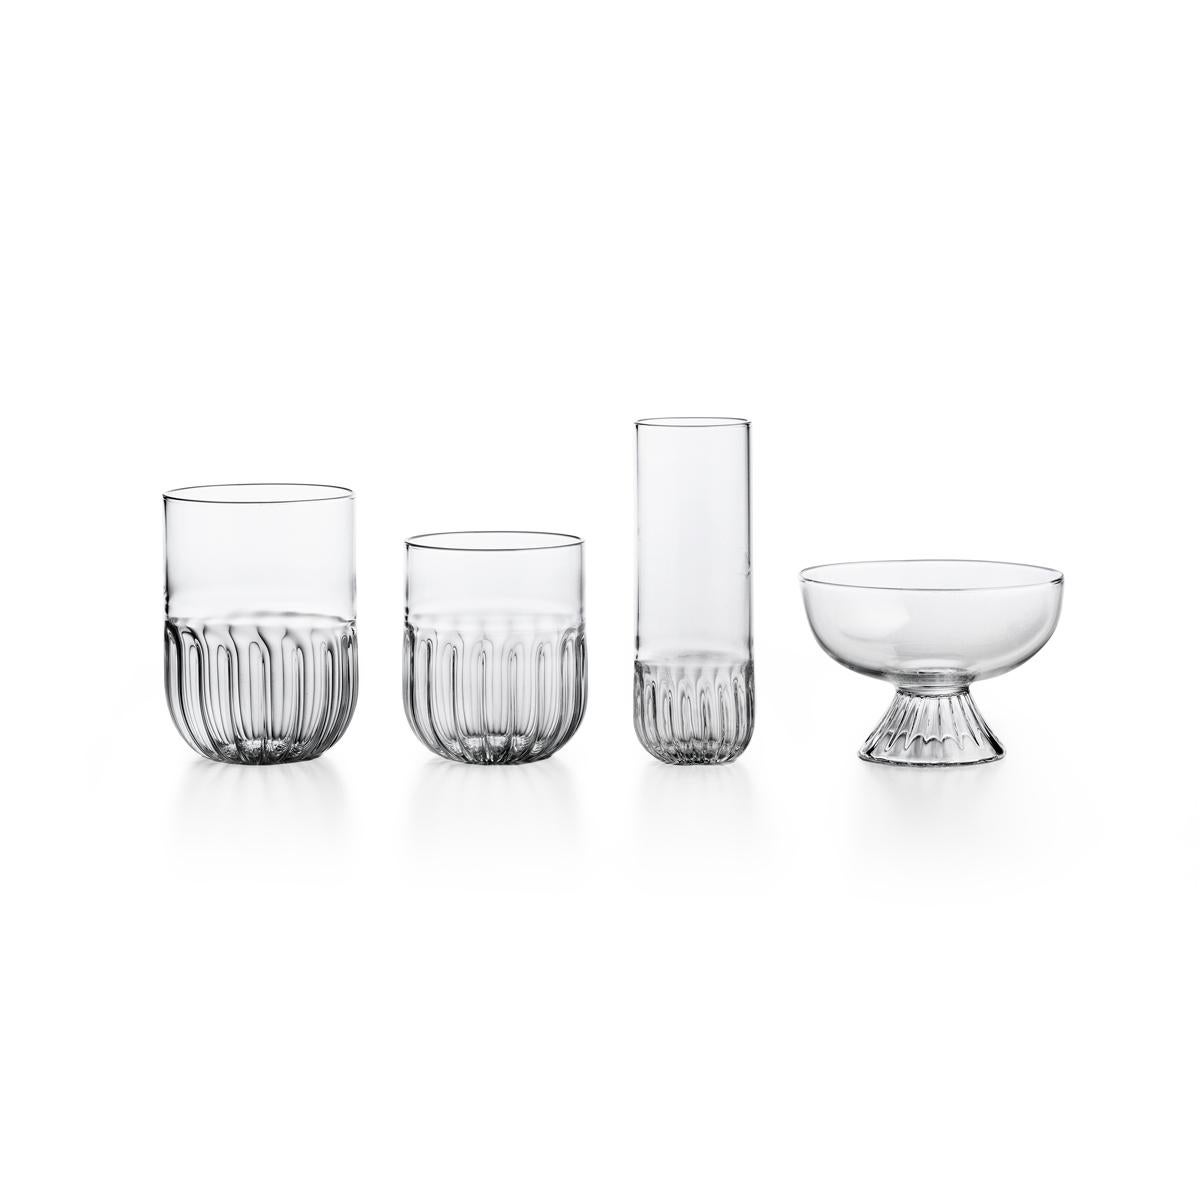 Mouth blown water glass. The routine collection is a glassware family designed by Matteo Cibic, who define it as “an essential collection for a smart daily life”. All the pieces of Routine are handcrafted and feature a soft plissé motif at the base